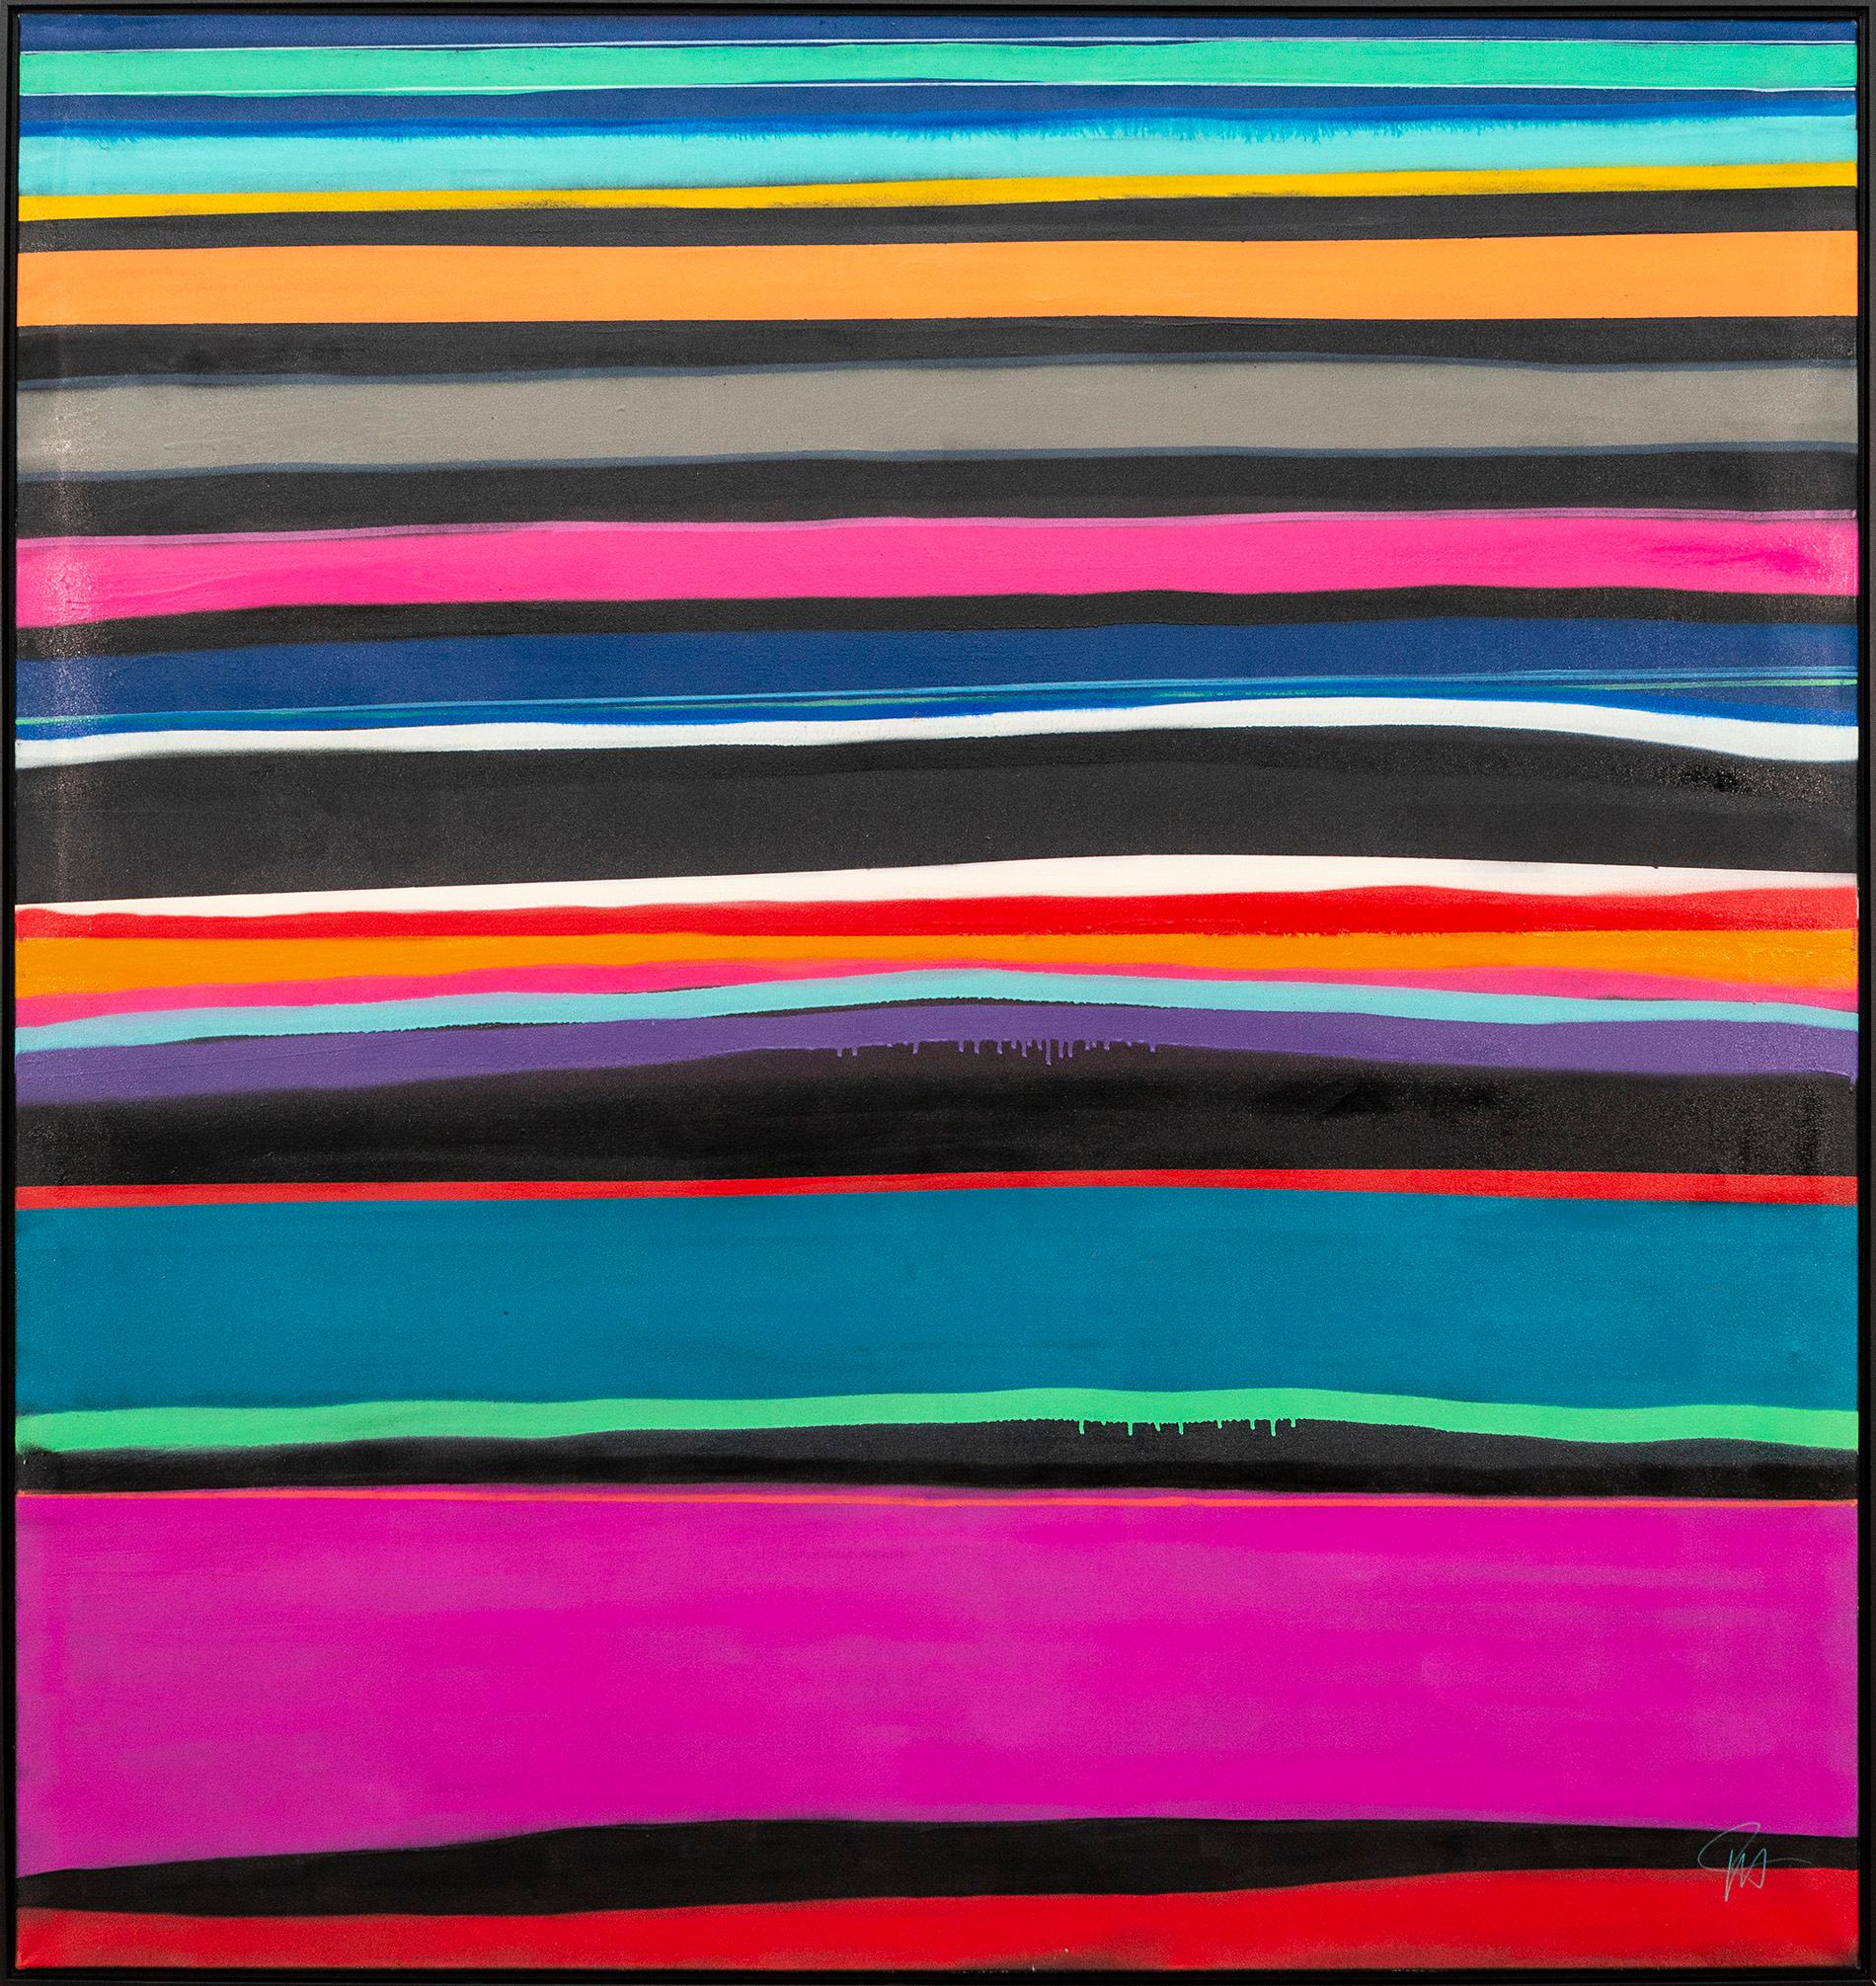 Viktor Mitic Abstract Painting - Southern Stripes 21-01 - pop-art, graffiti, acrylic and spray paint on canvas